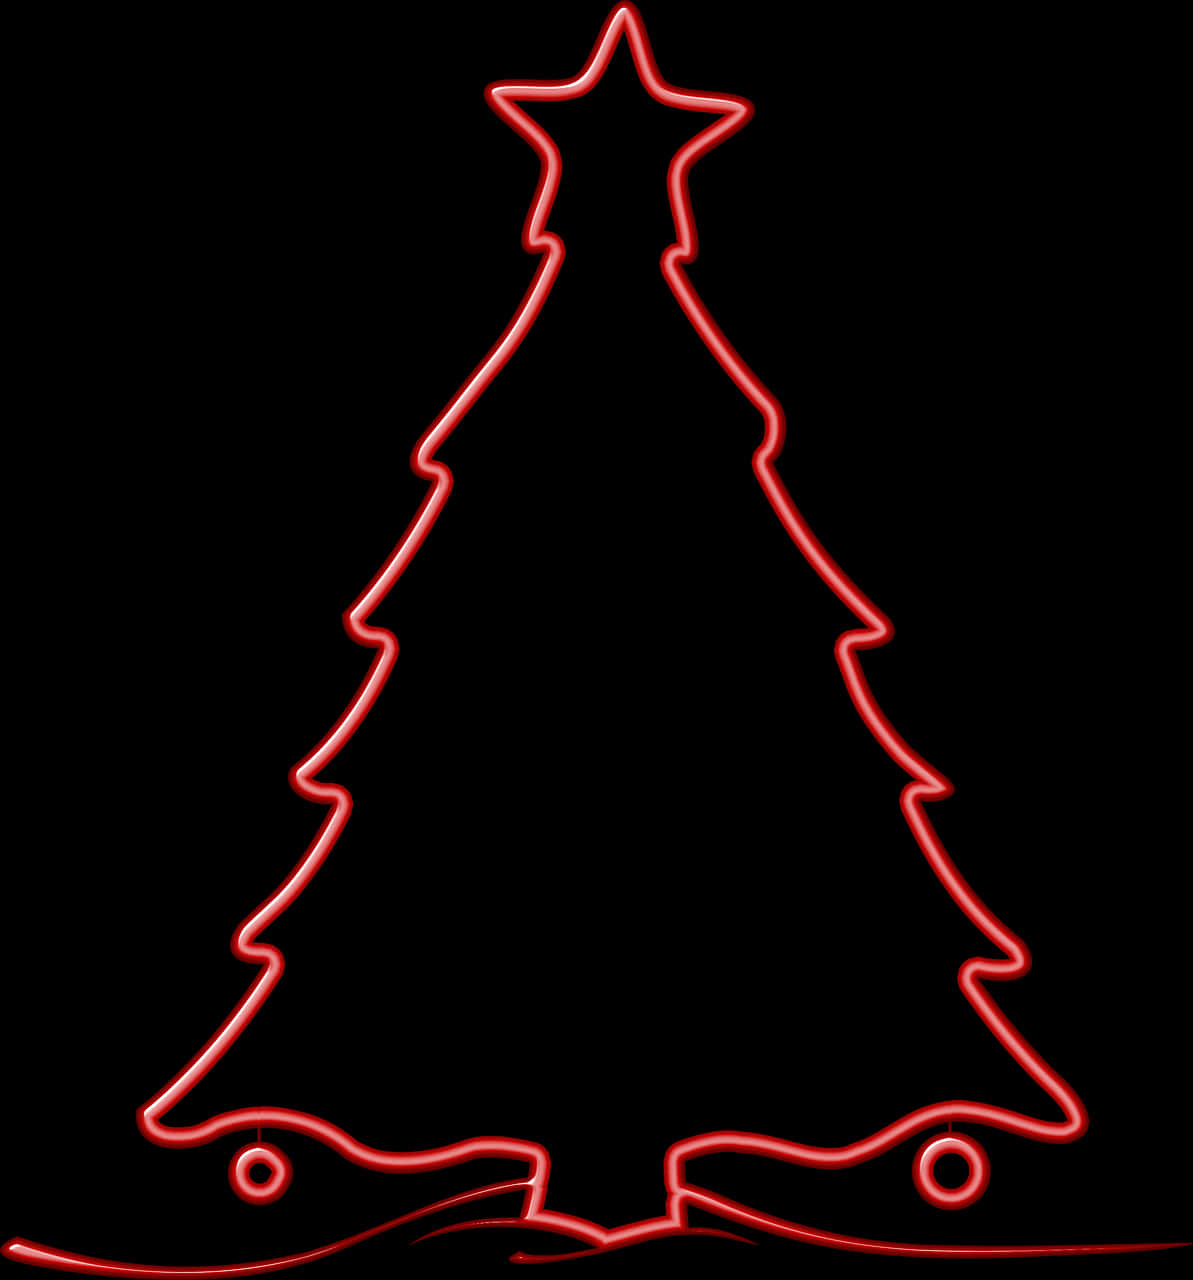 A Red Outline Of A Christmas Tree